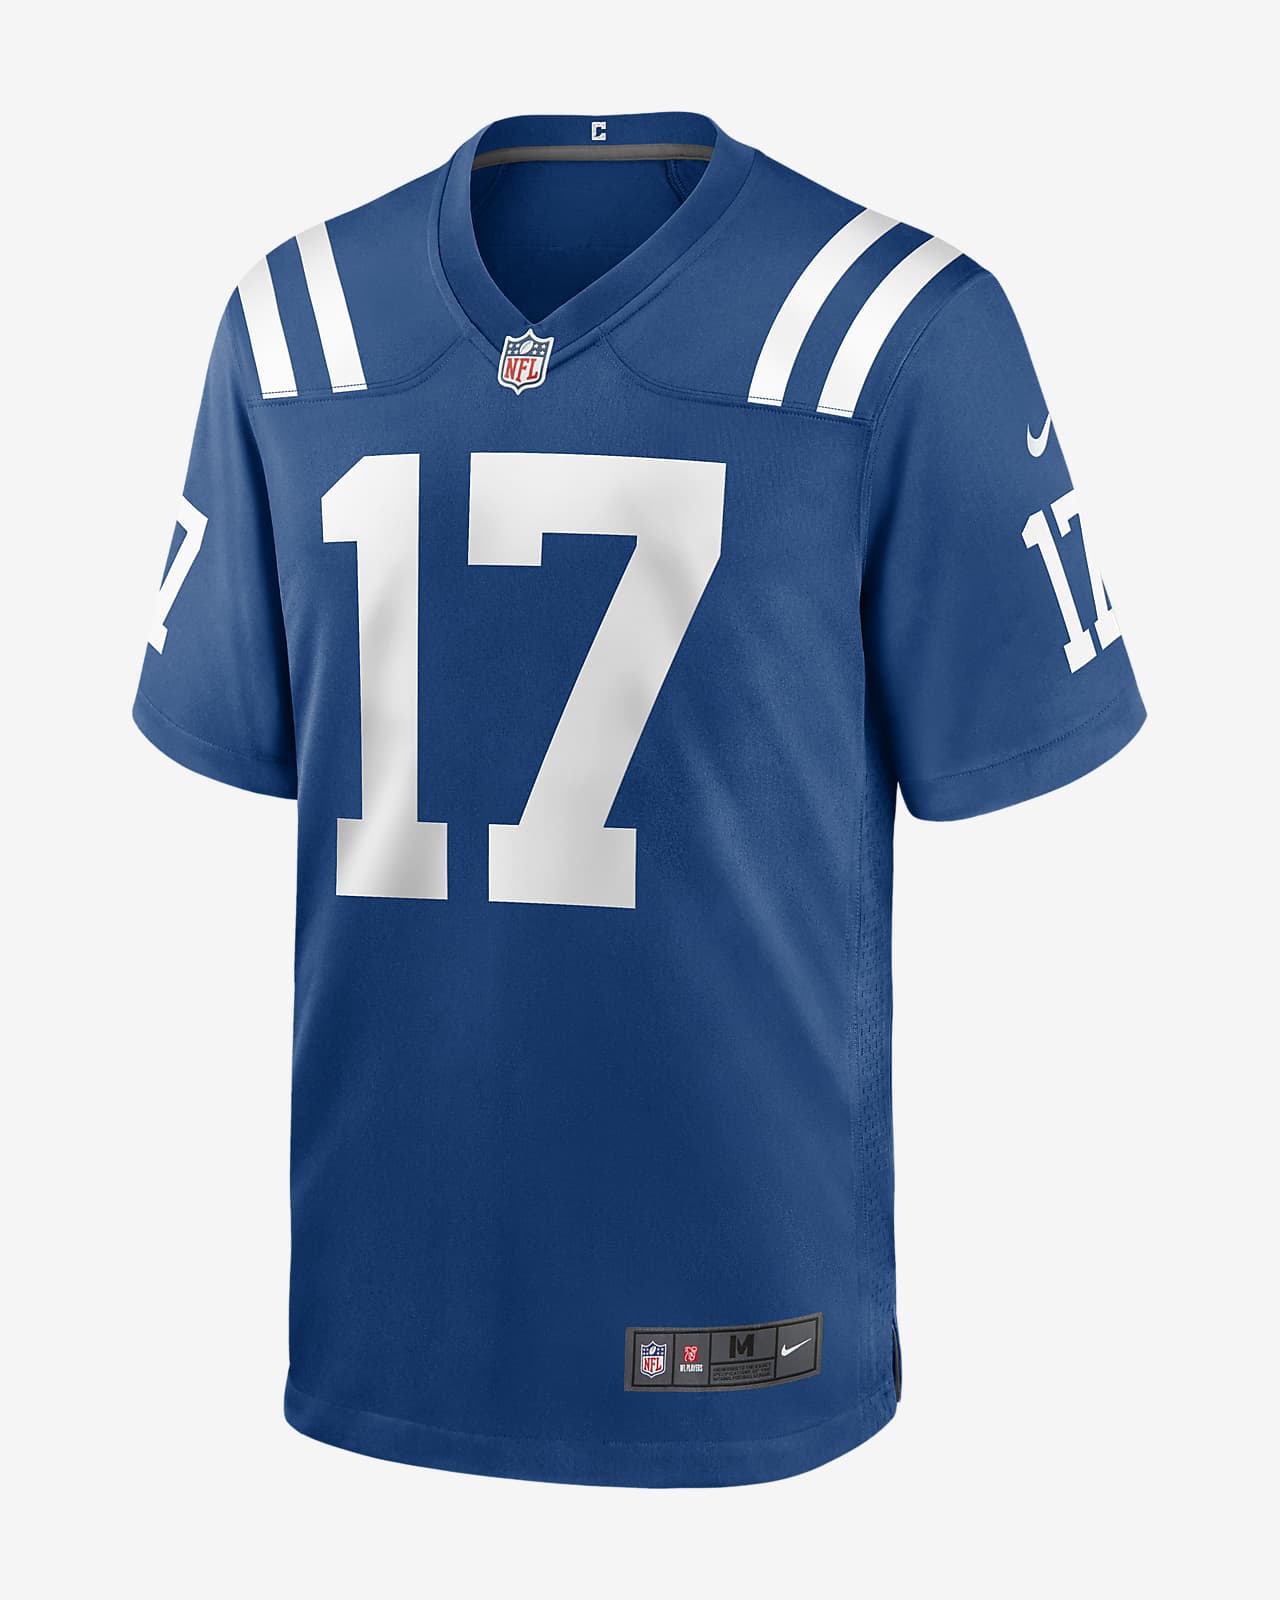 rivers jersey colts